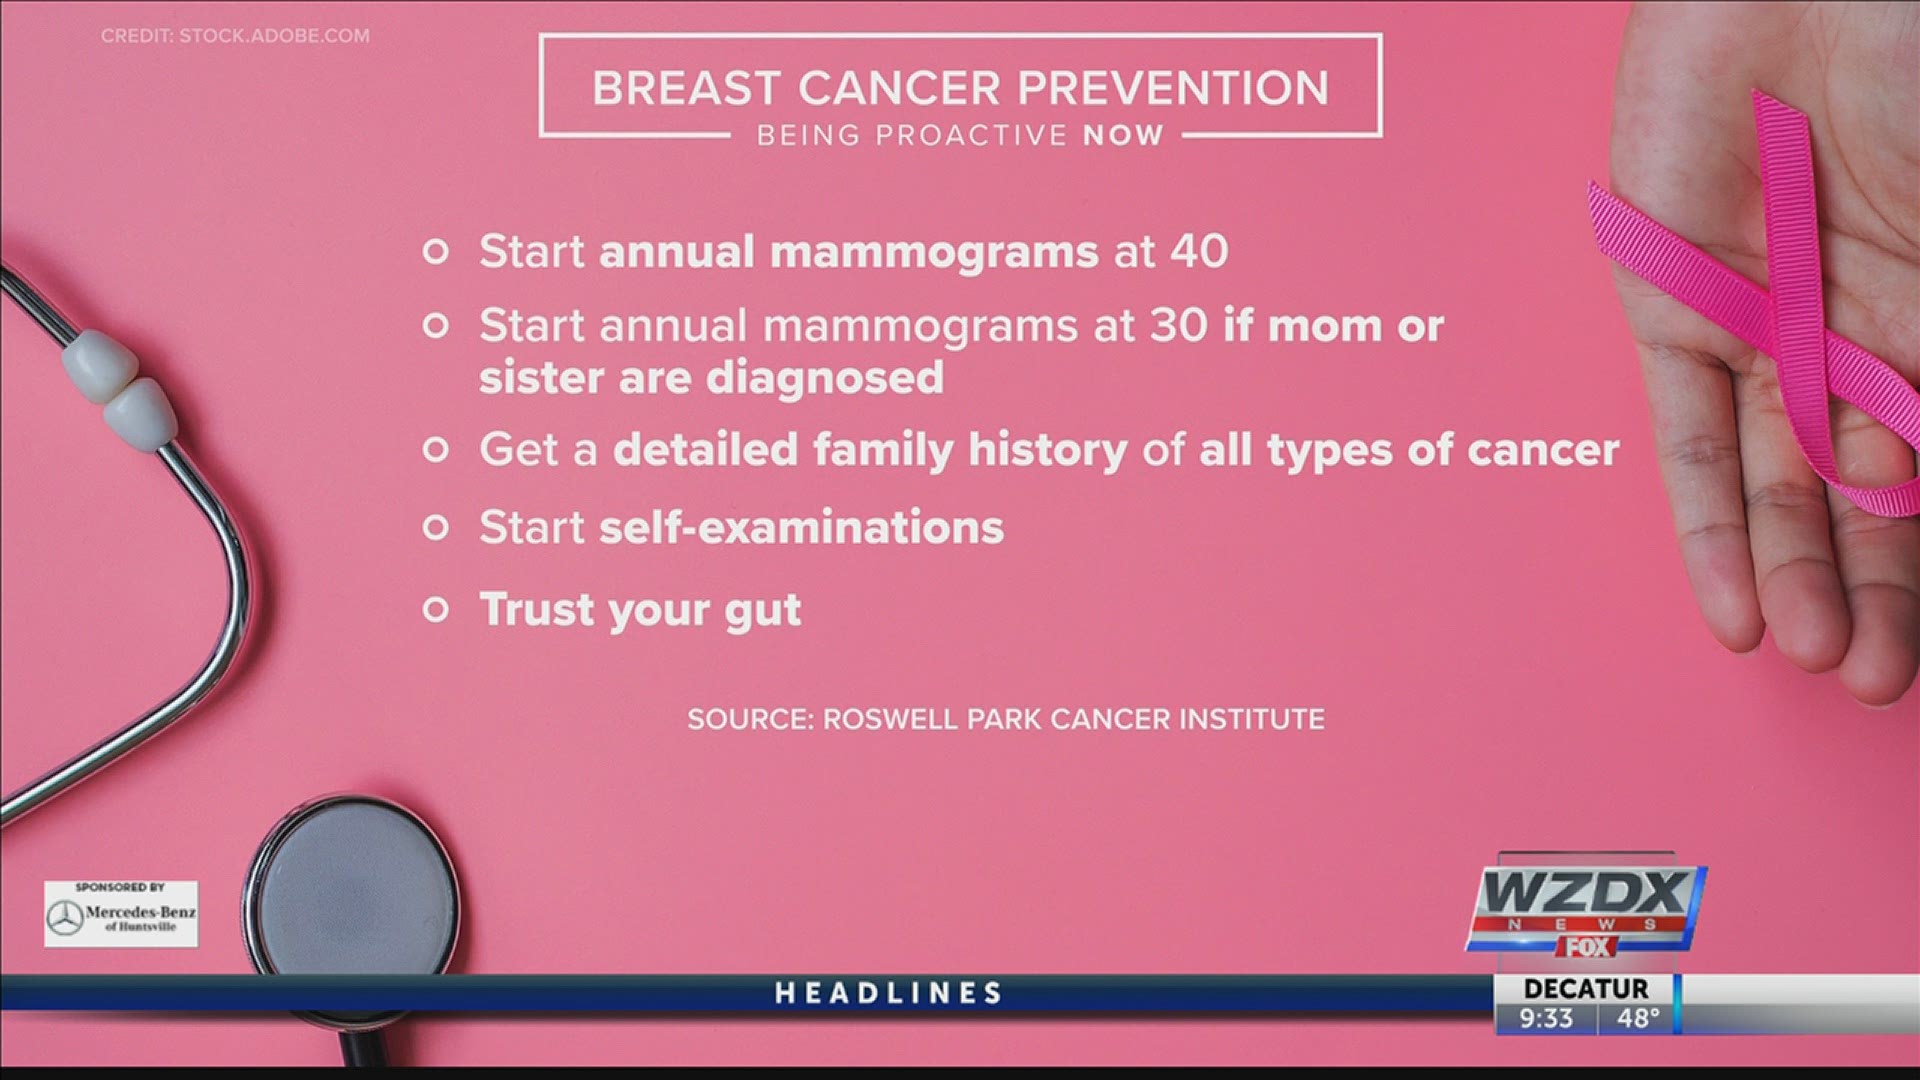 October is Breast Cancer Awareness month and there are things women can do now to be proactive about prevention.